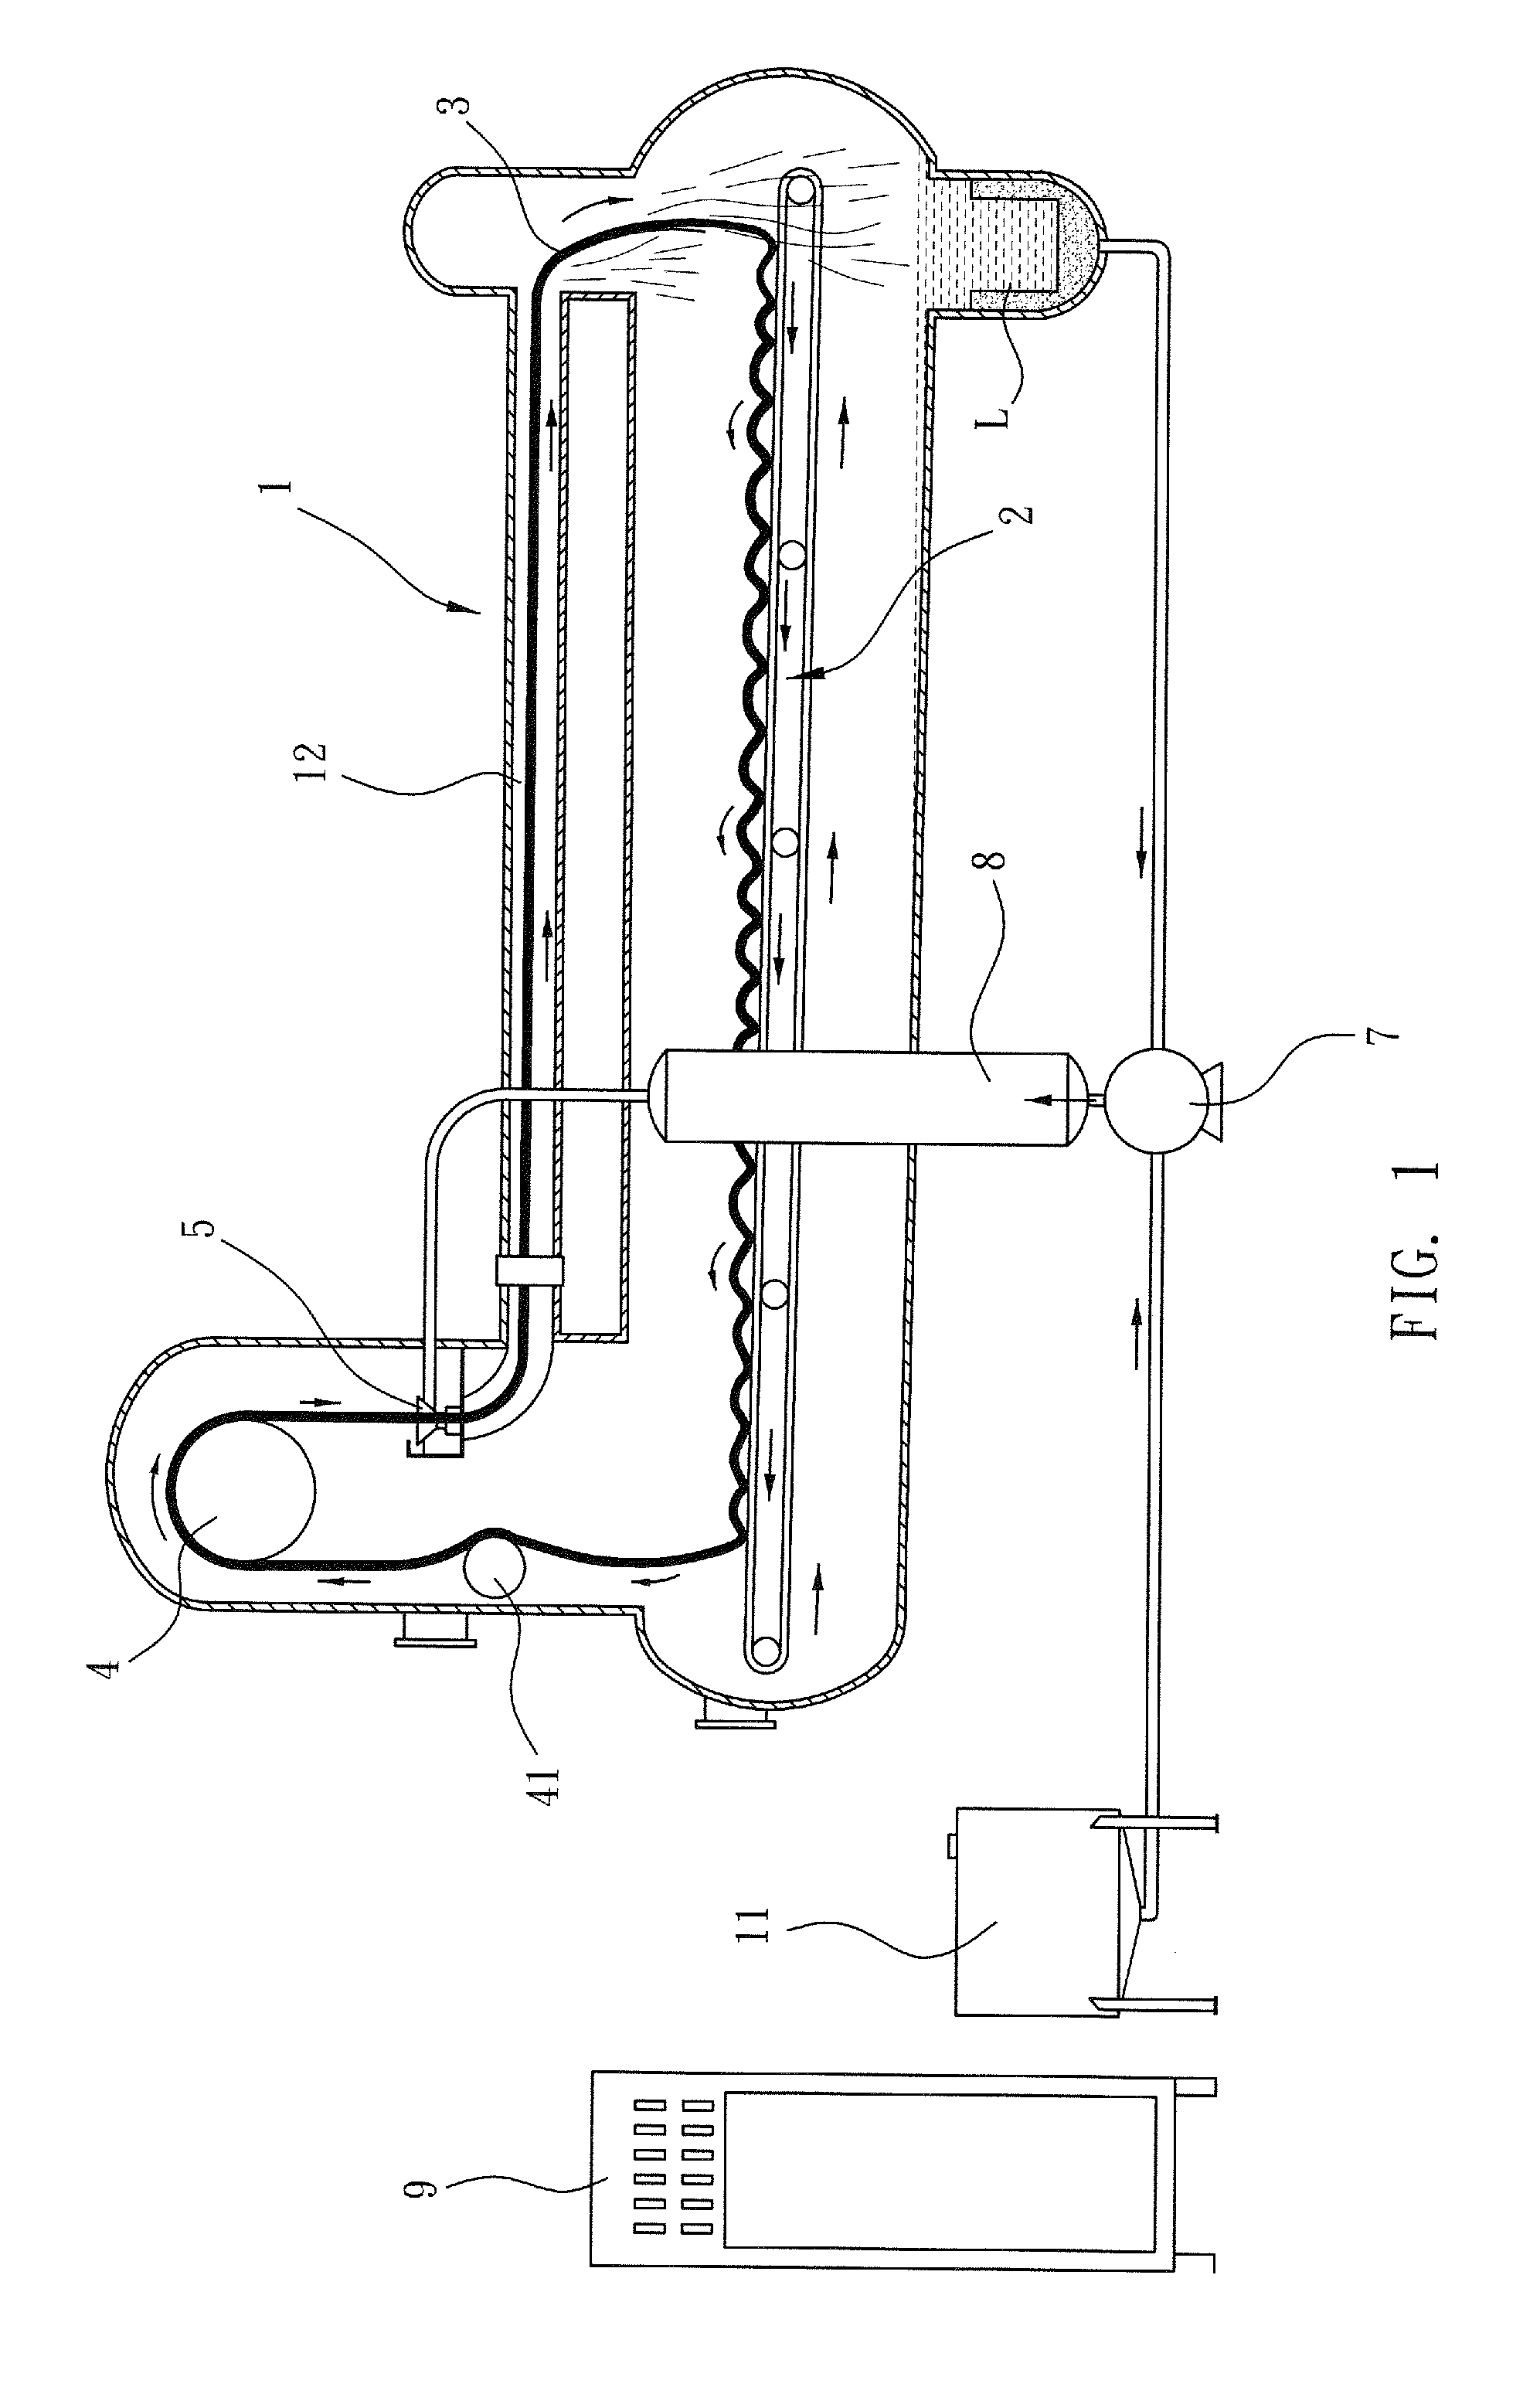 Control Method For Synchronized Fabric Circulation In Conveyor Drive Fabric Dyeing Machine